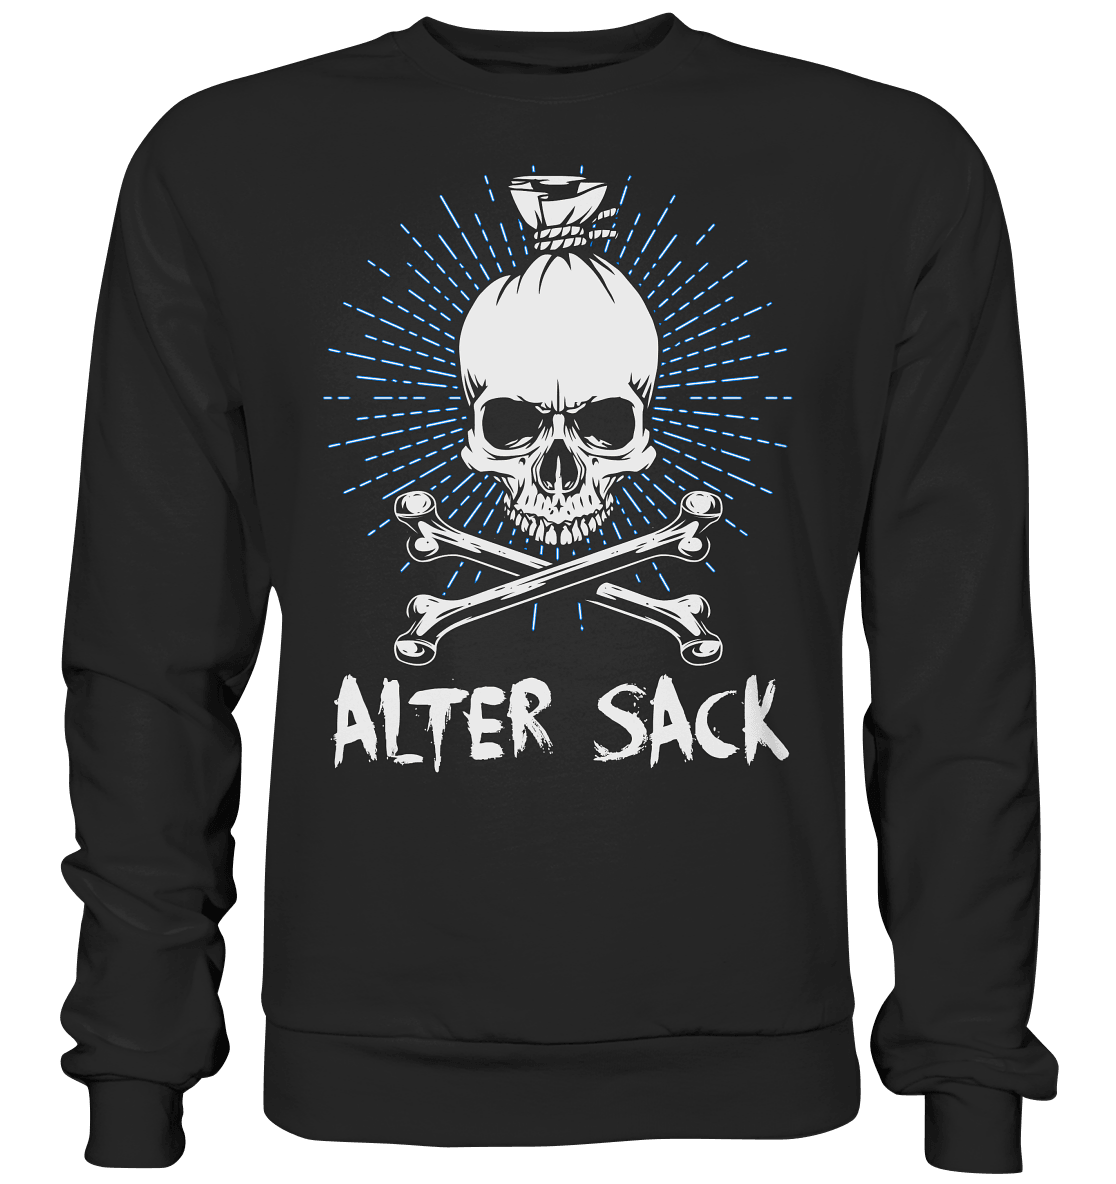 Alter Sack - Sweatshirt - Totally Wasted